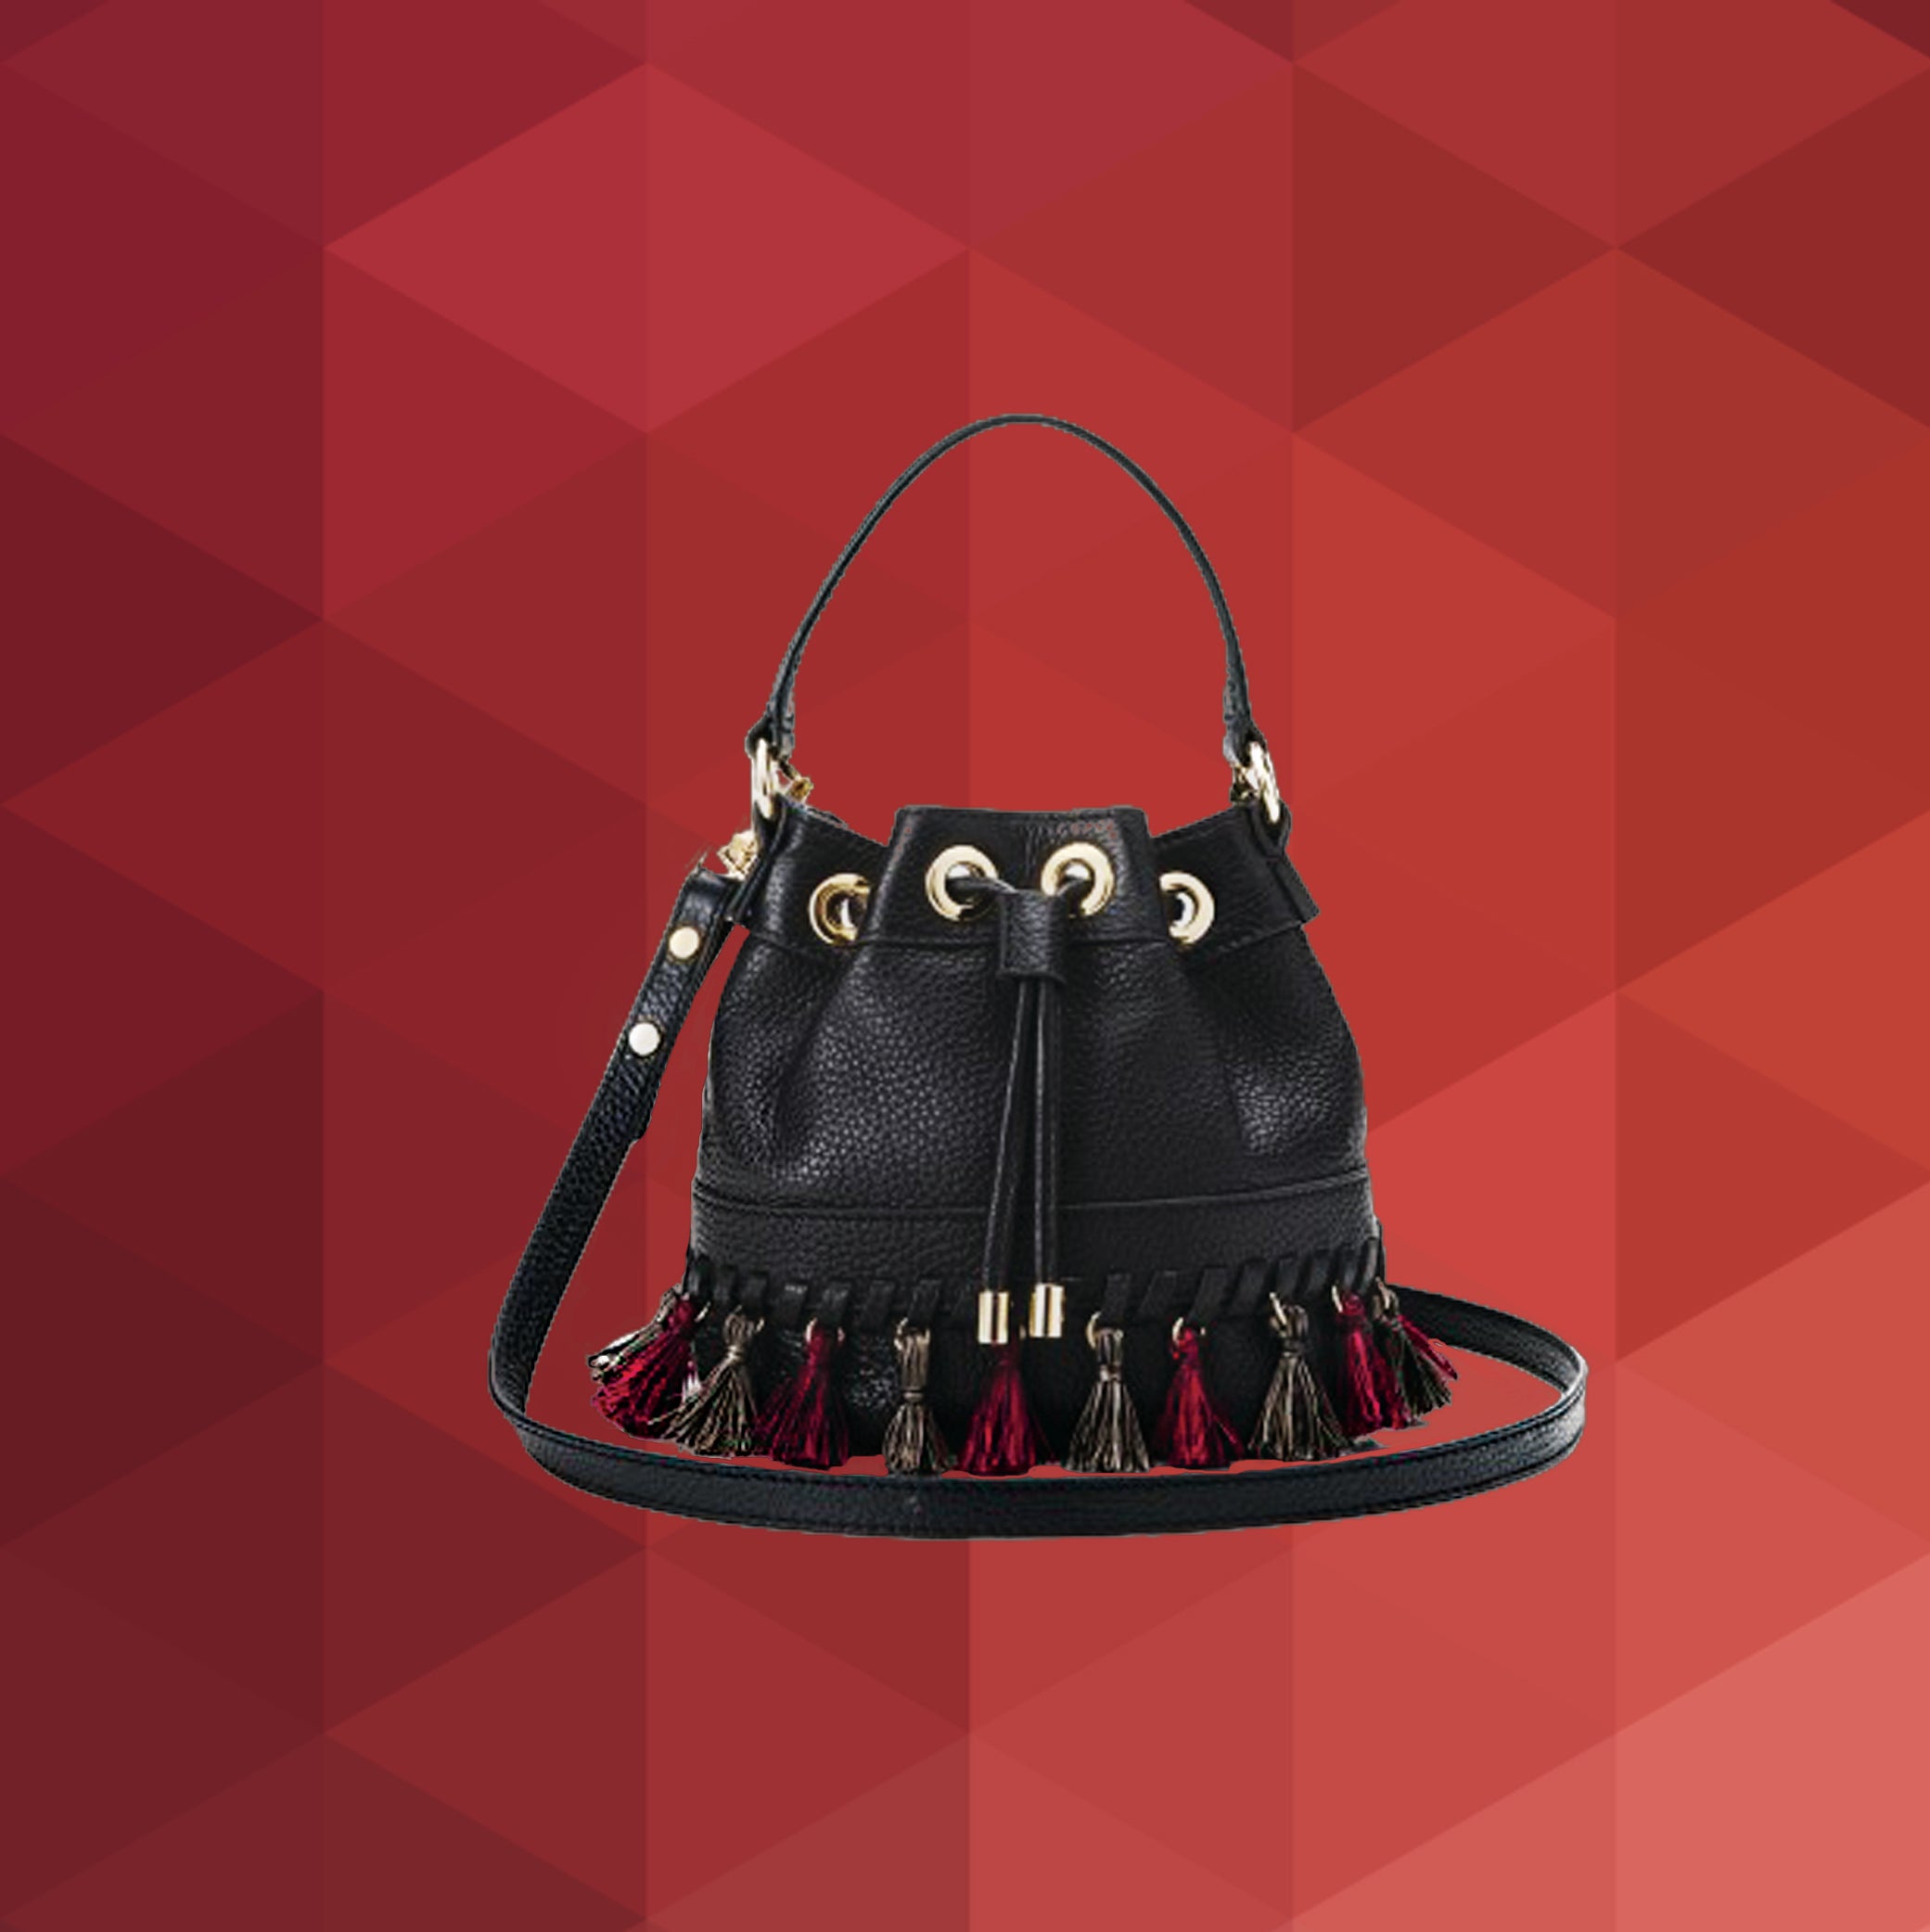 Small Wonders: Mini Purses You'll Fall in Love With
